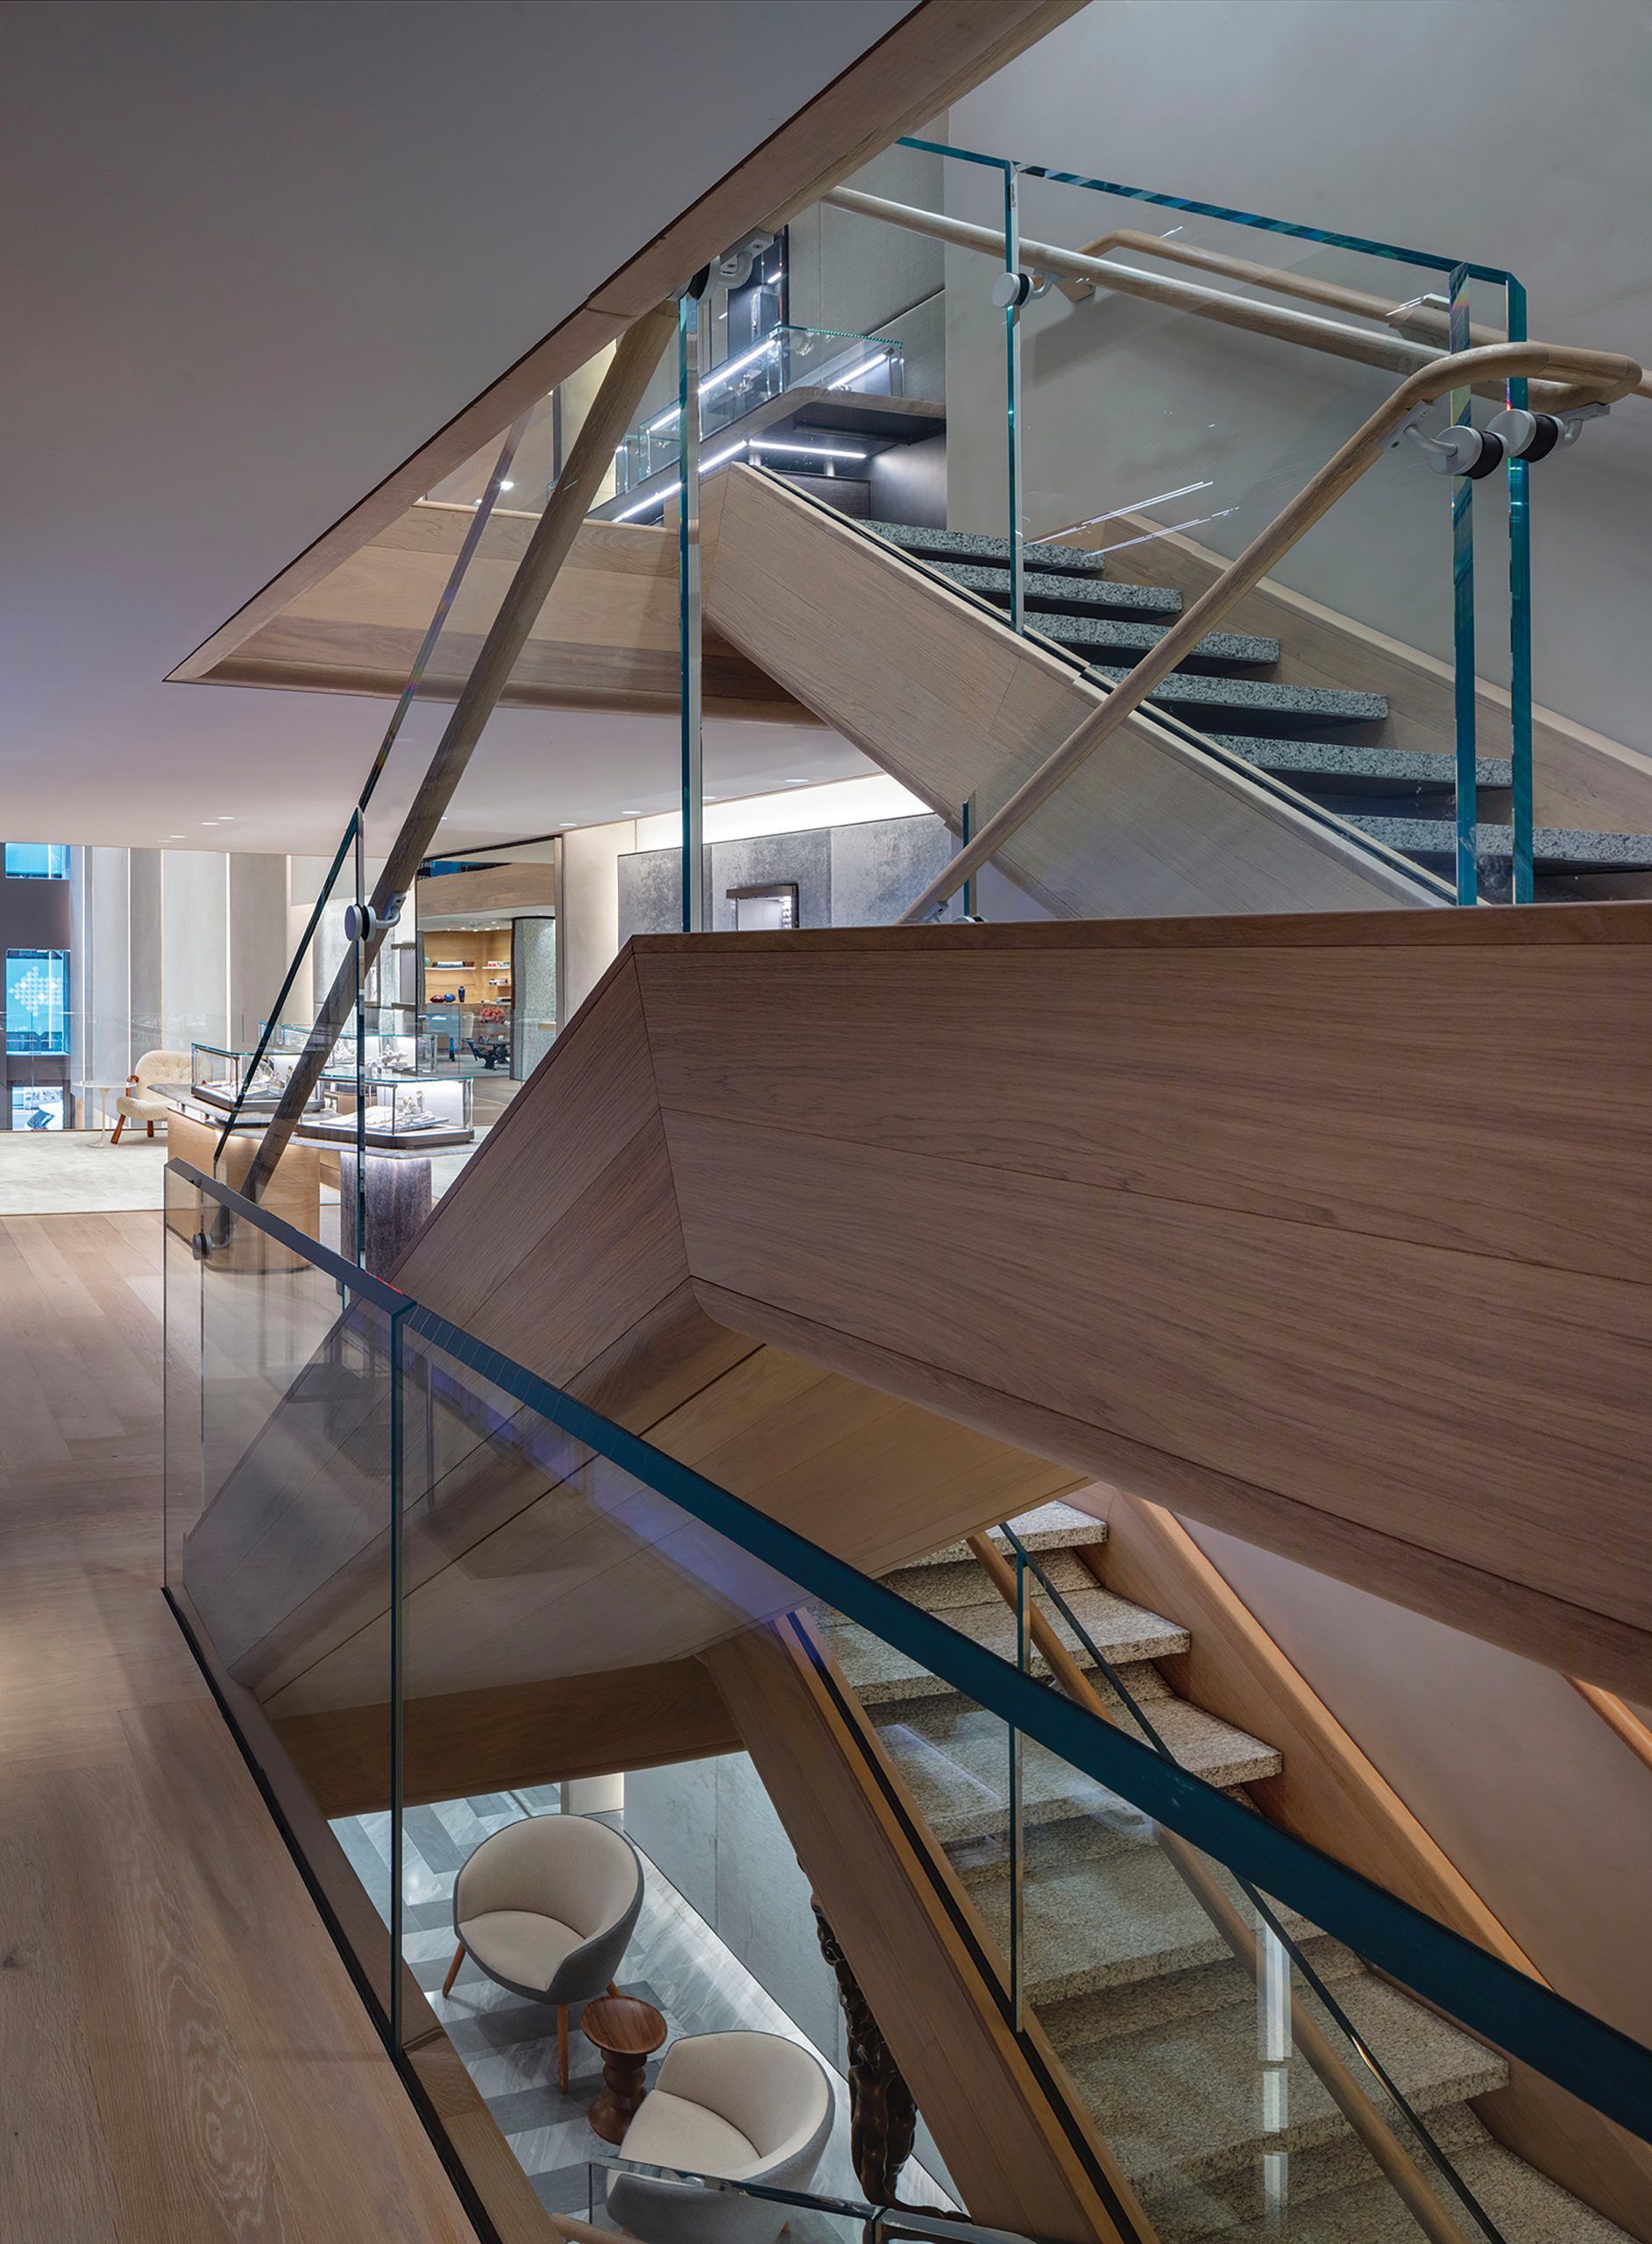 The main staircase’s glass-paneled design was influenced by the brand’s new Creative Director, Evan Yurman.